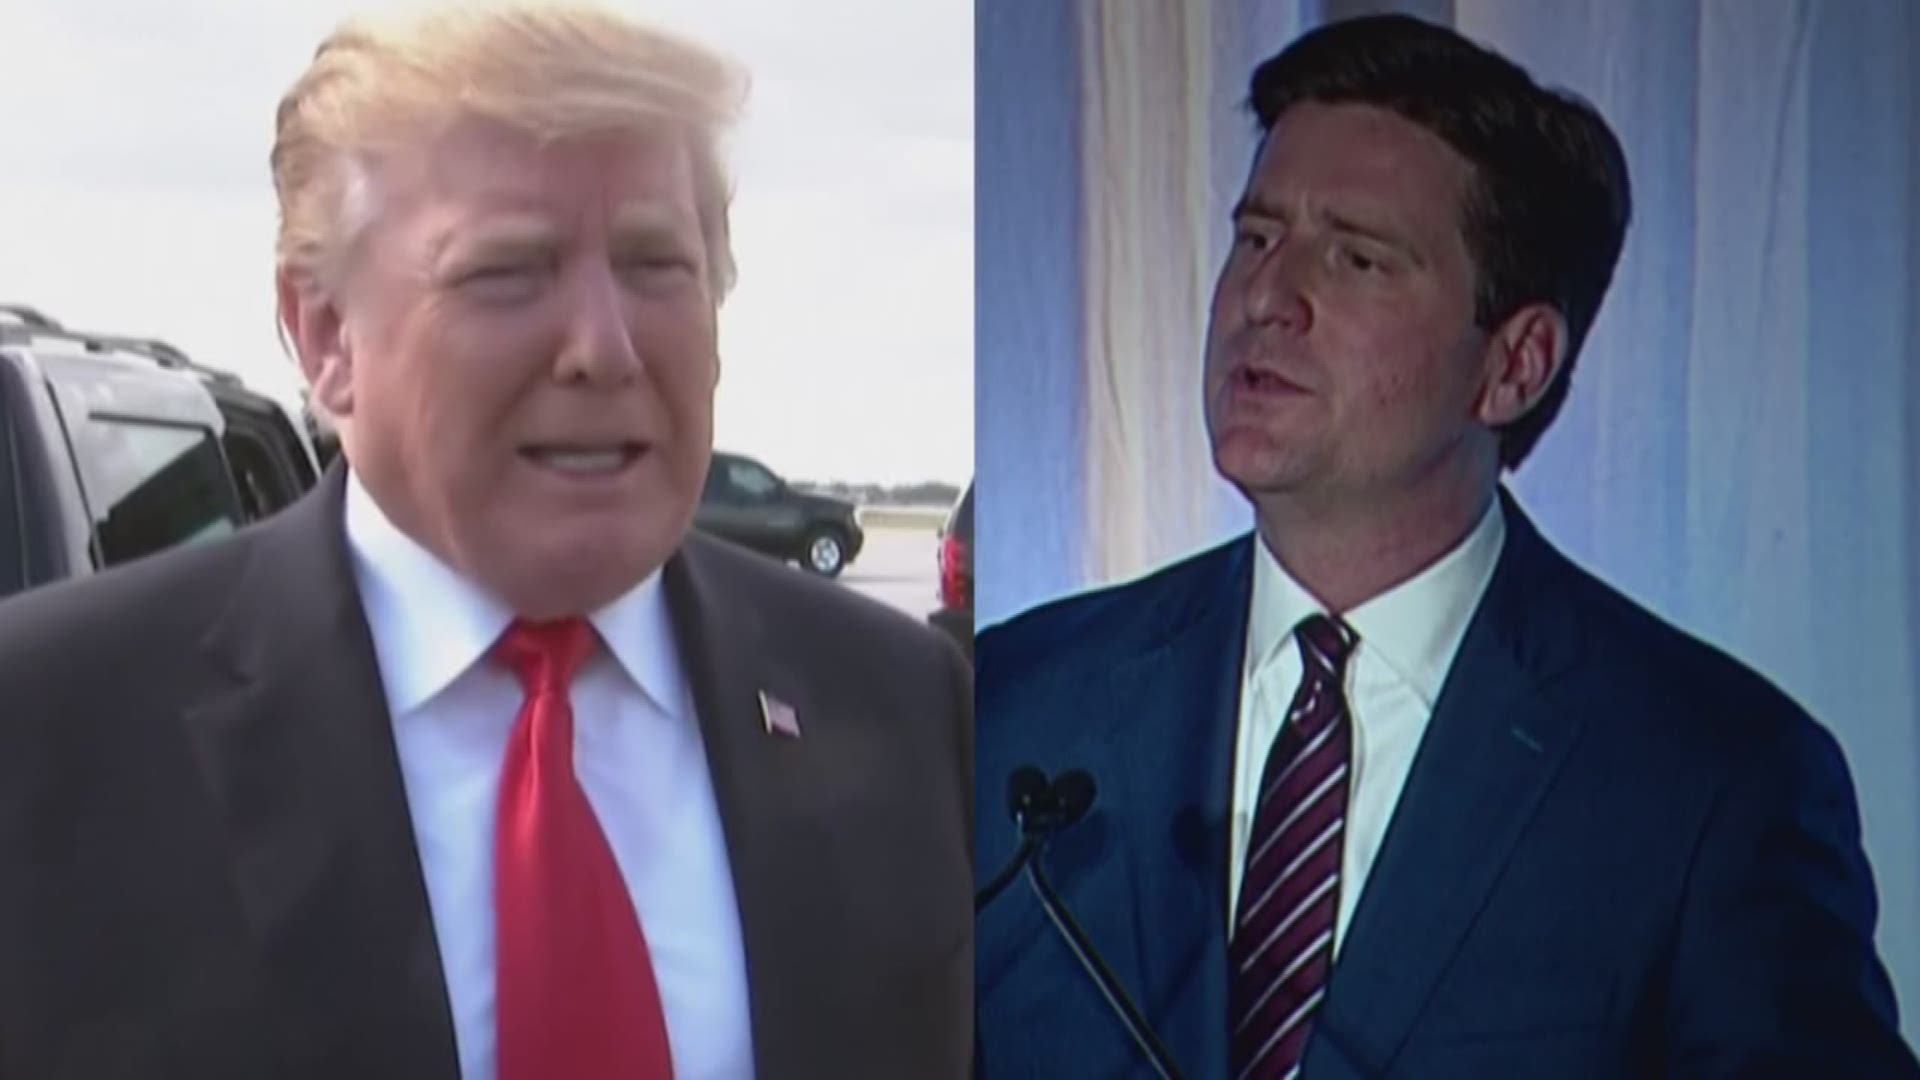 Congressman Greg Stanton of Phoenix is the latest Democrat to come out in favor of an impeachment investigation of President Trump. Stanton sits on the House Judiciary Committee, which would handle an impeachment investigation.